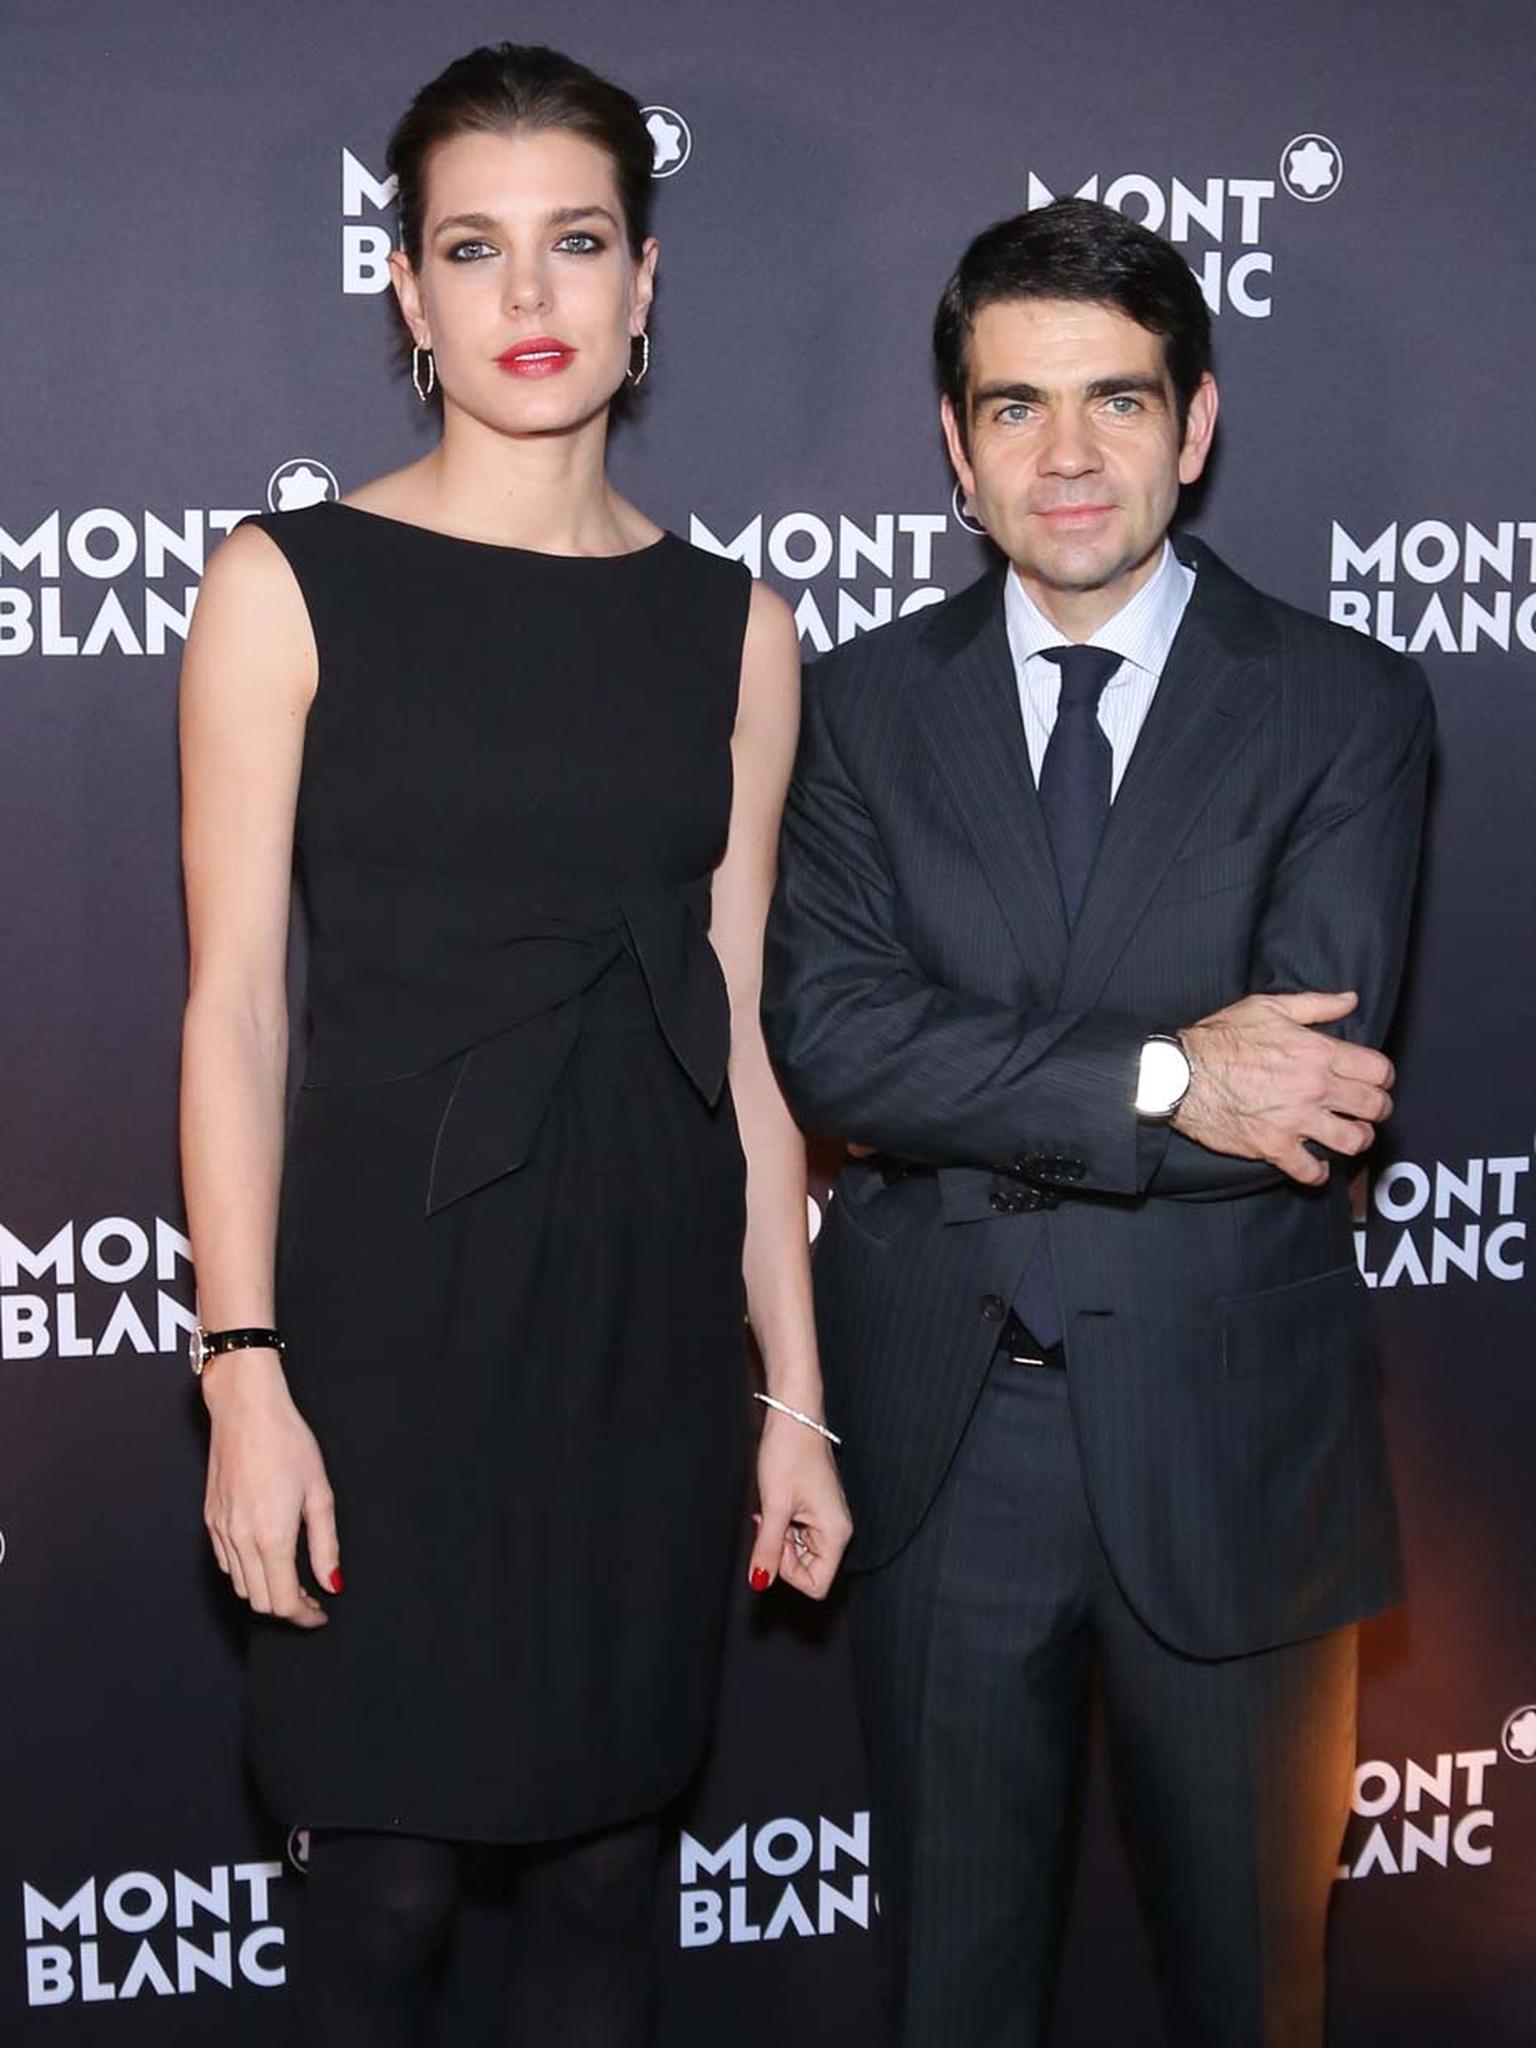 Charlotte Casiraghi with Montblanc CEO Jerôme Lambert at the SIHH watch salon.